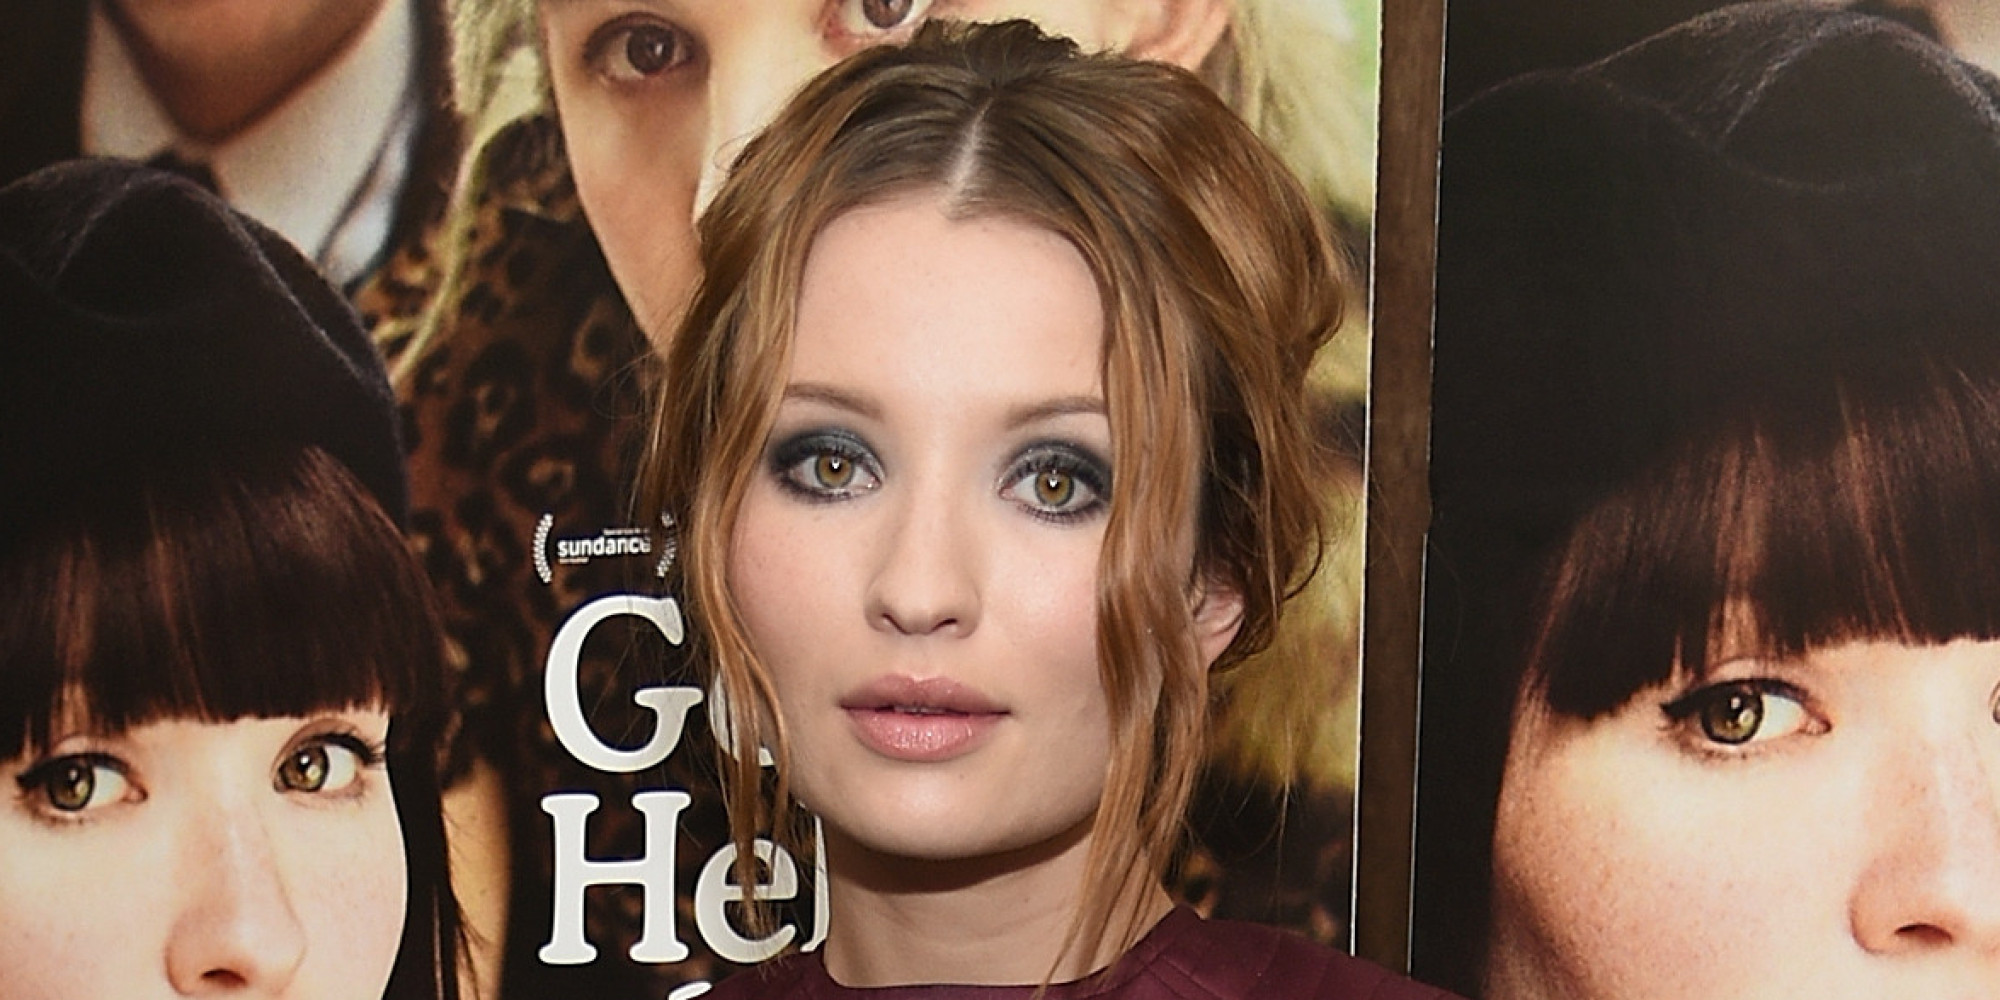 Author Stephanie Meyer wanted actress Emily Browning for the lead role in “...